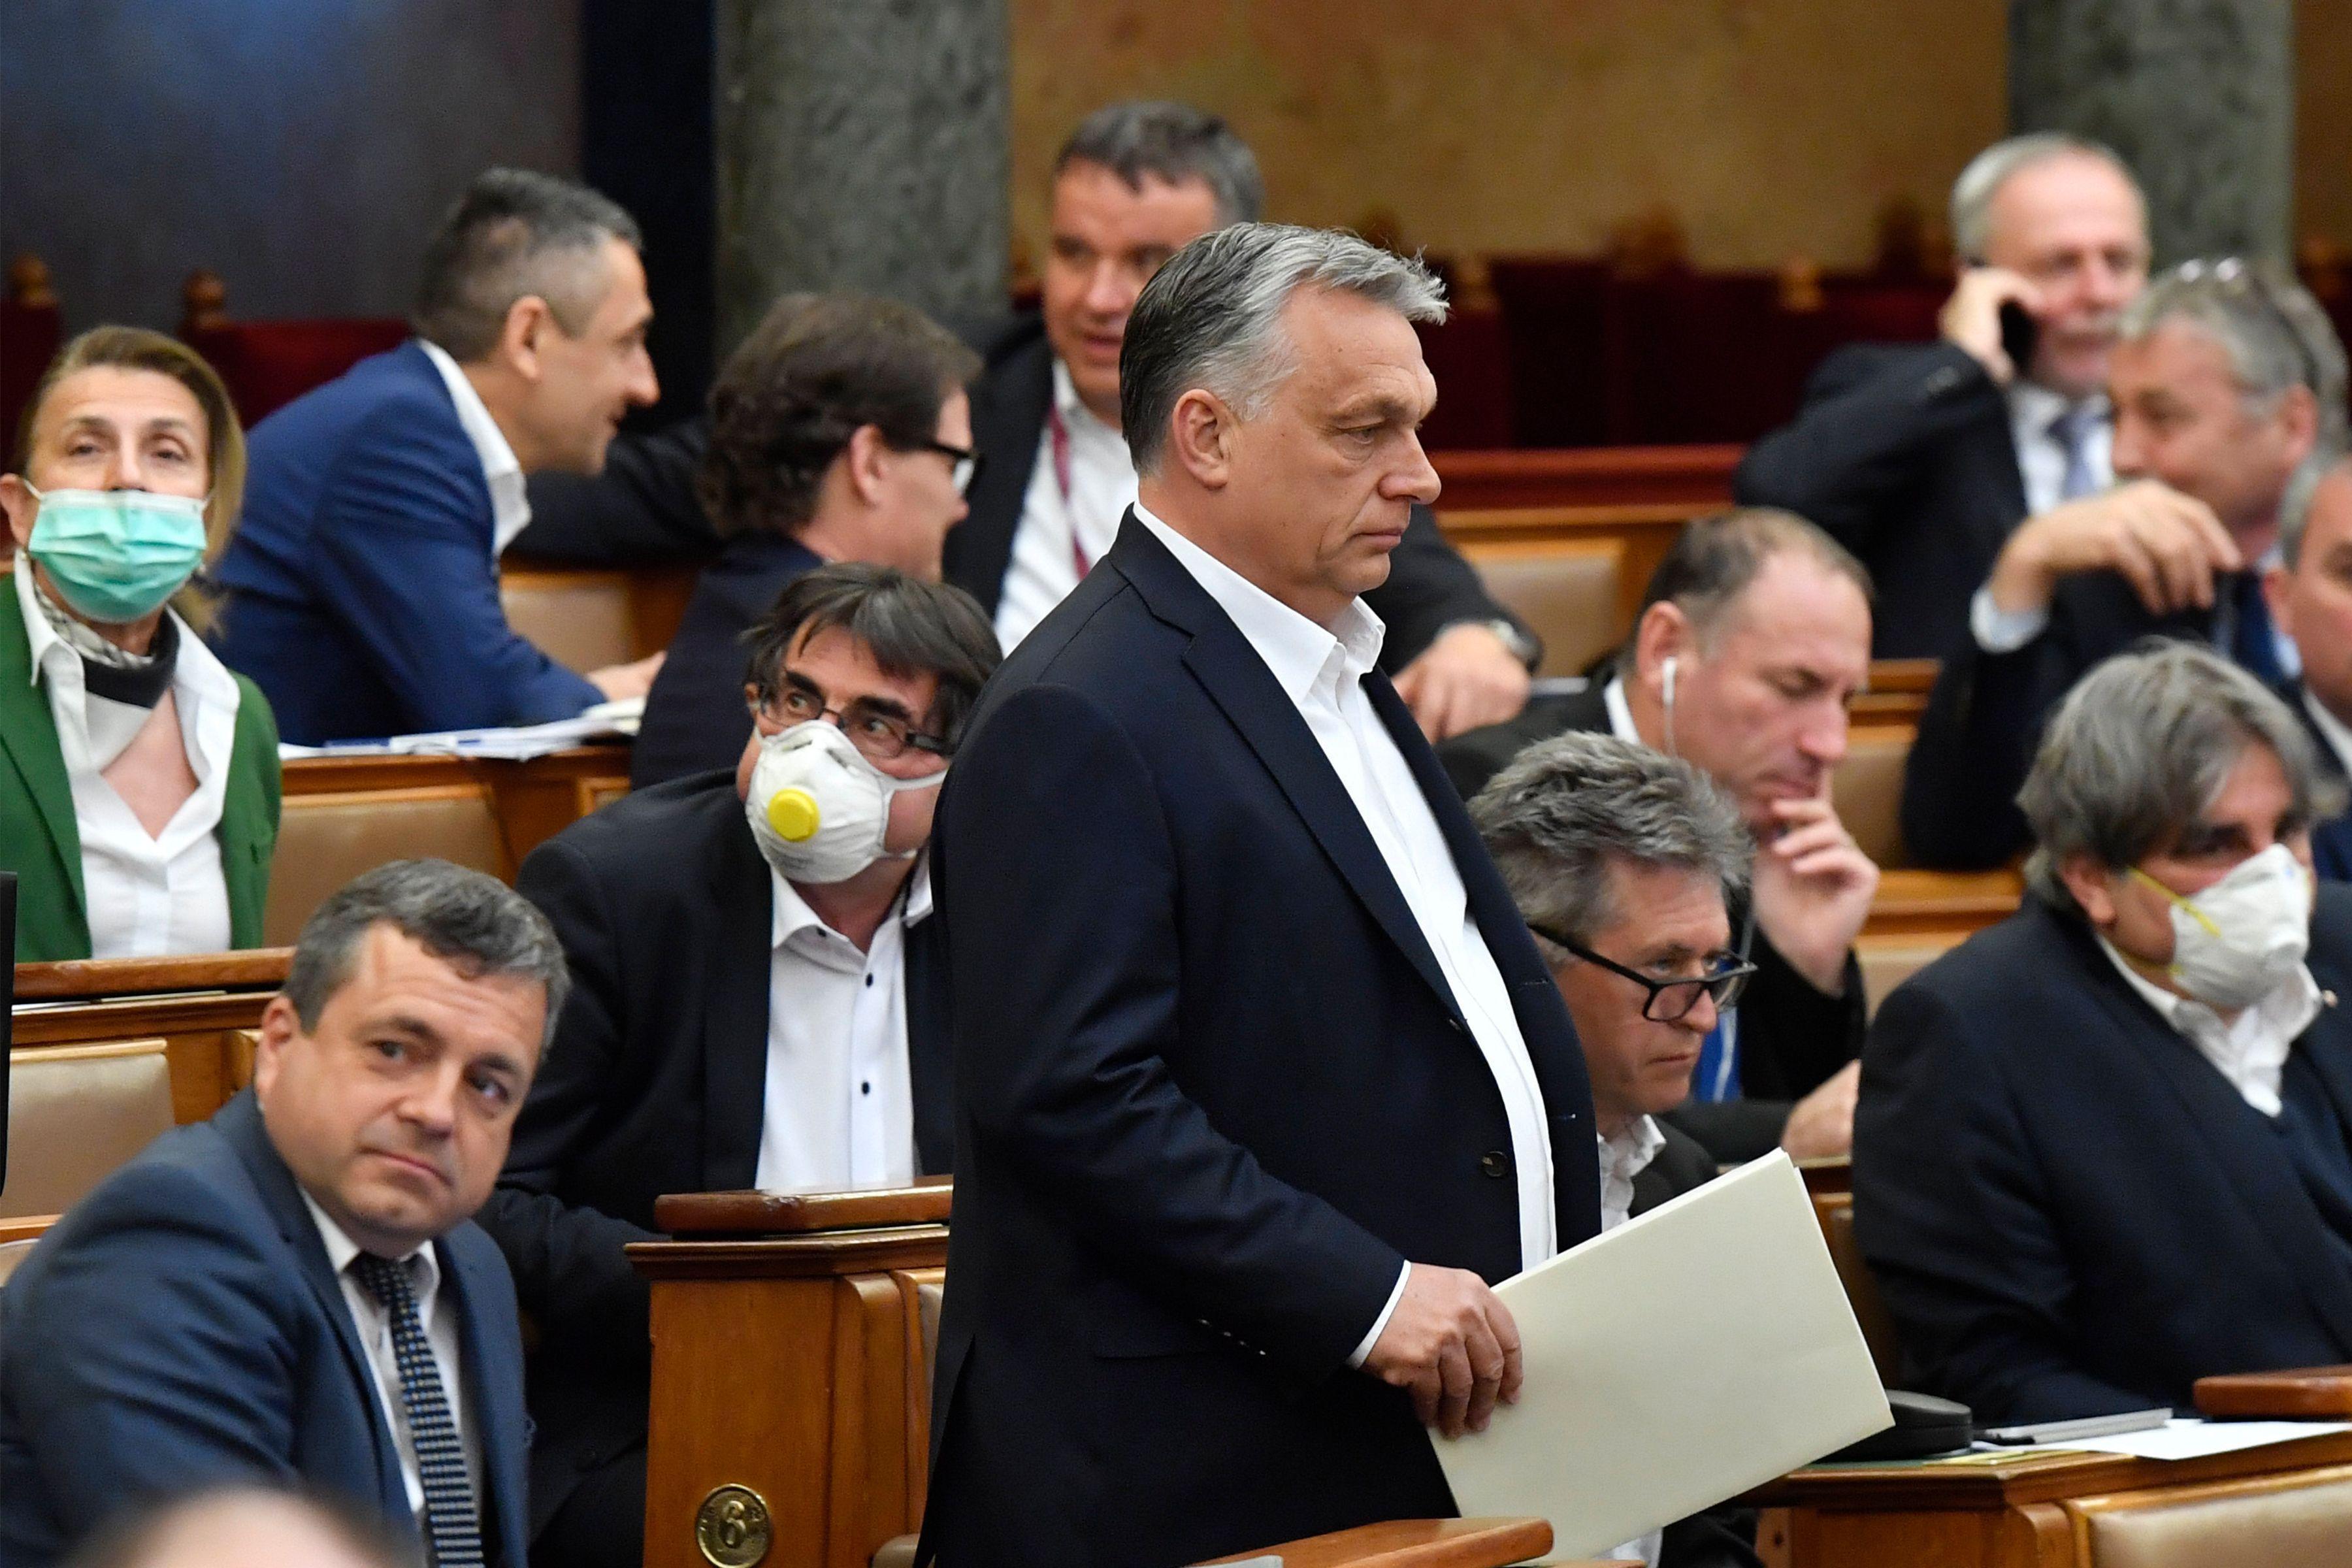 Viktor Orban walks in front of seated members of the Hungarian Parliament, some wearing masks.